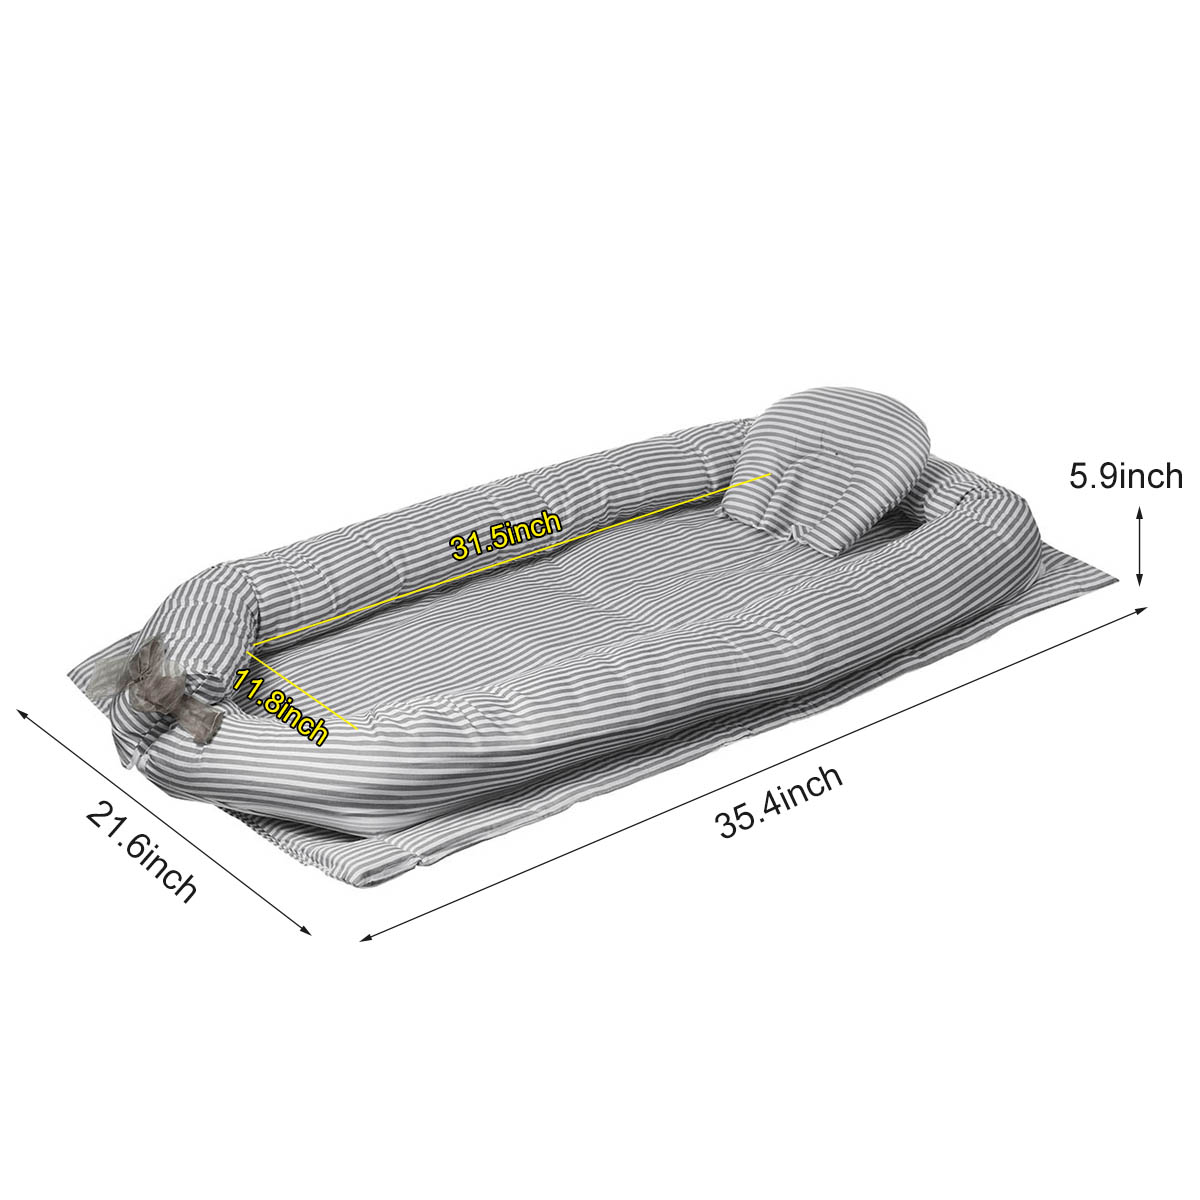 Folding-Baby-Bed-Portable-Kids-Sleeping-Basket-Portable-Infant-Sleeper-with-Bumper-Travel-1810330-9